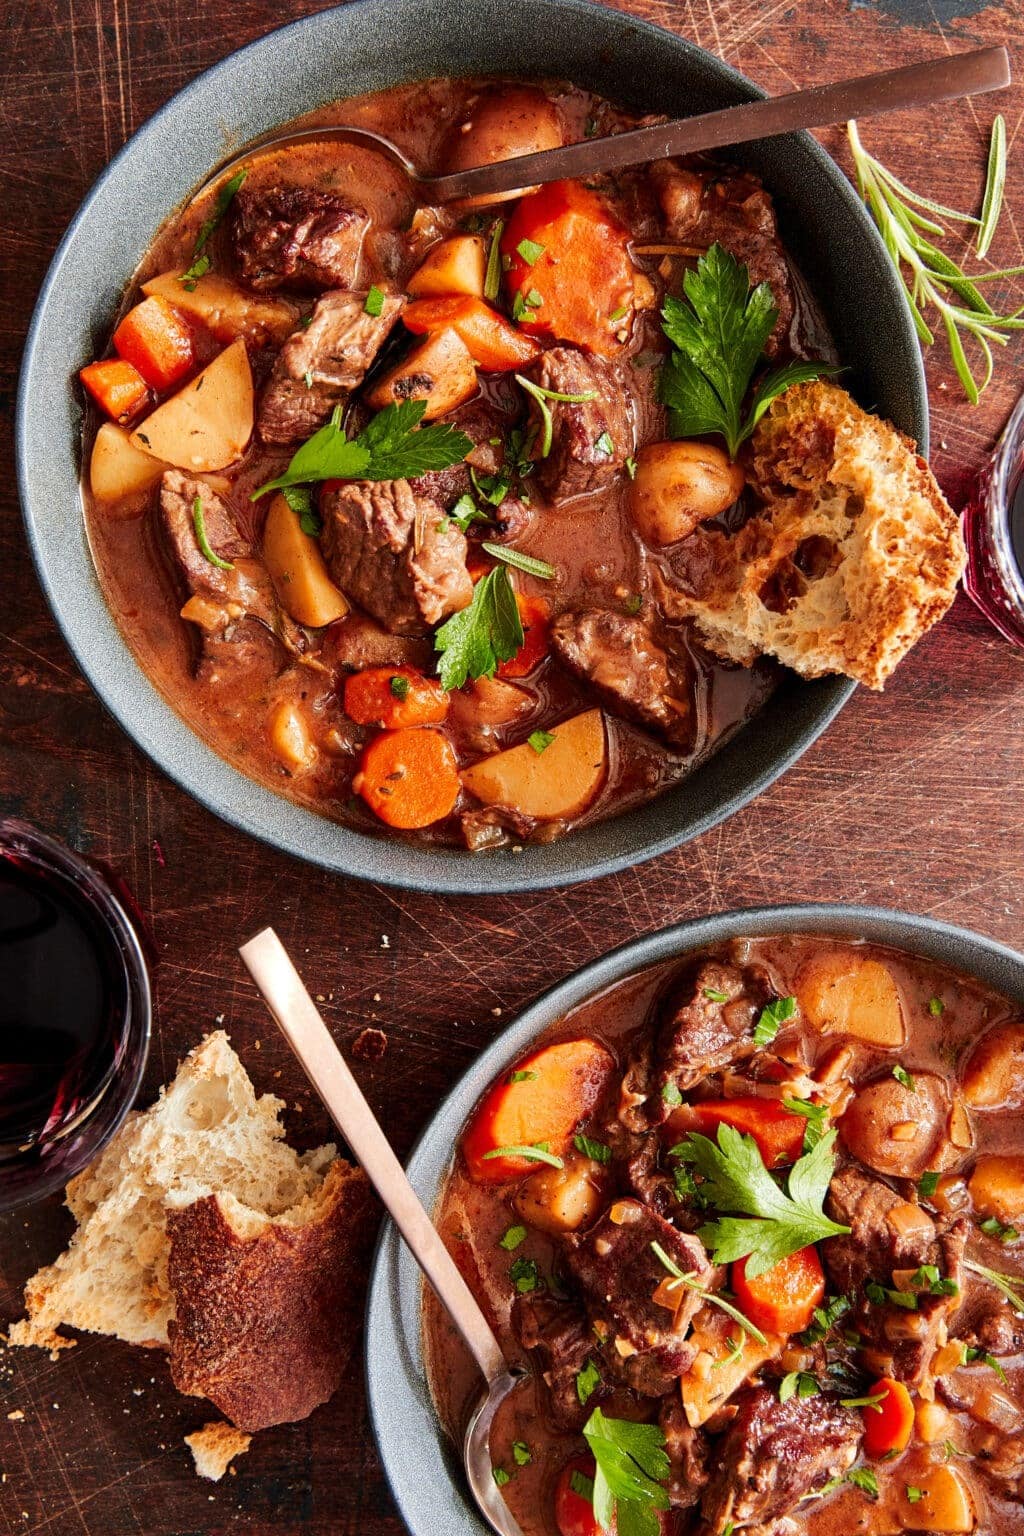 Bowls of Slow Cooker Beef Stew with carrots, potatoes and parsley 